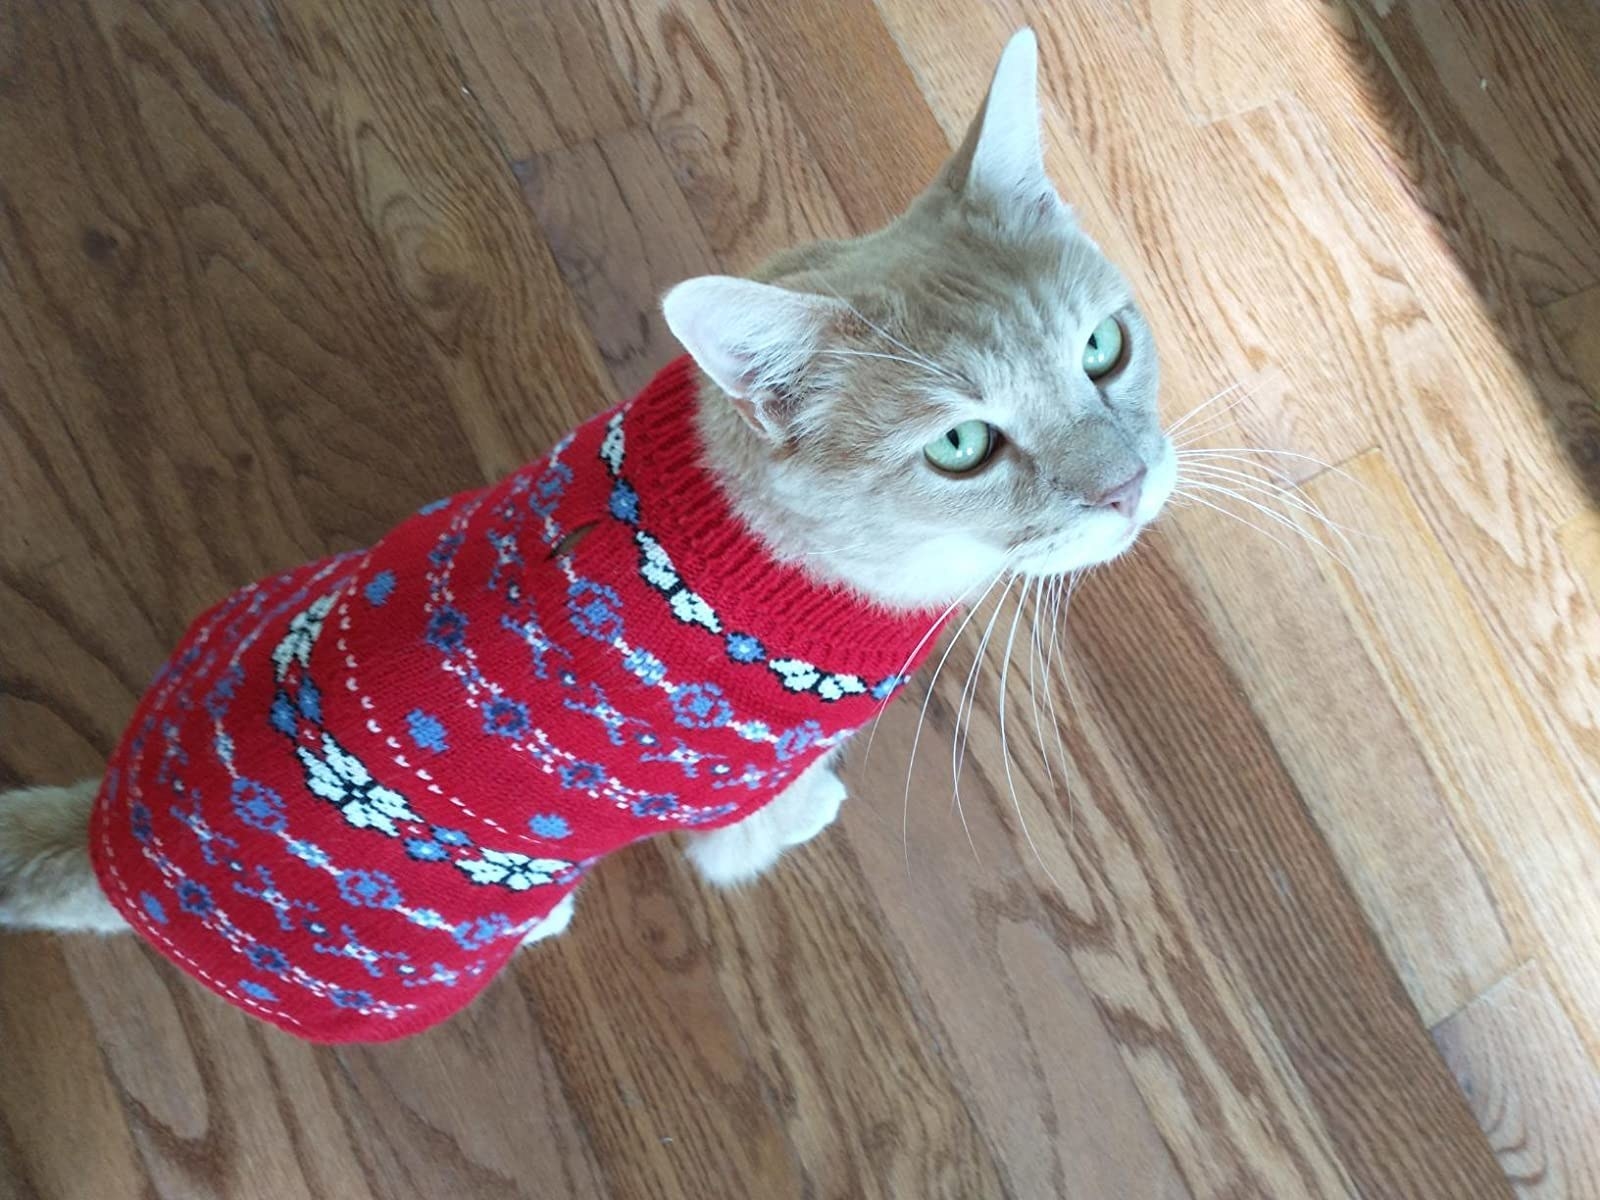 A cat wearing the sweater in red